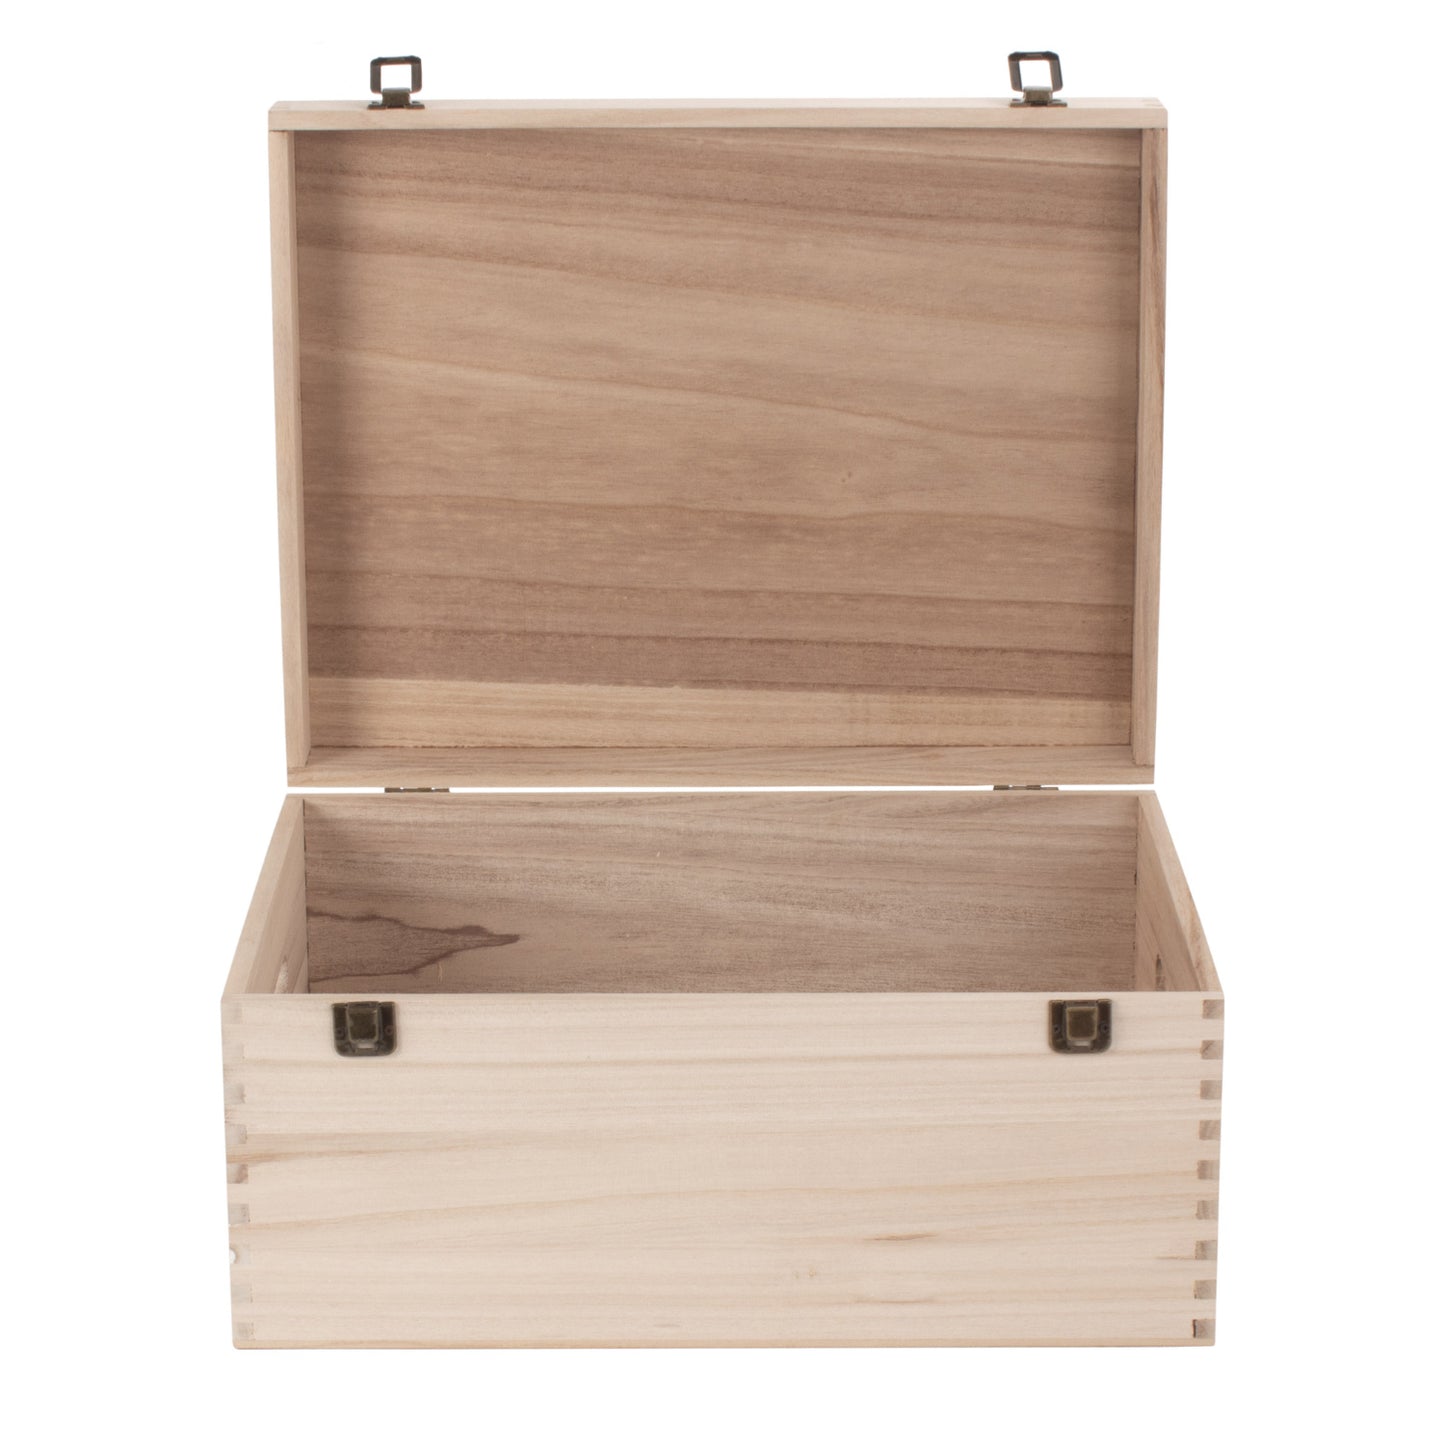 16 Inch Unvarnished Wooden Box